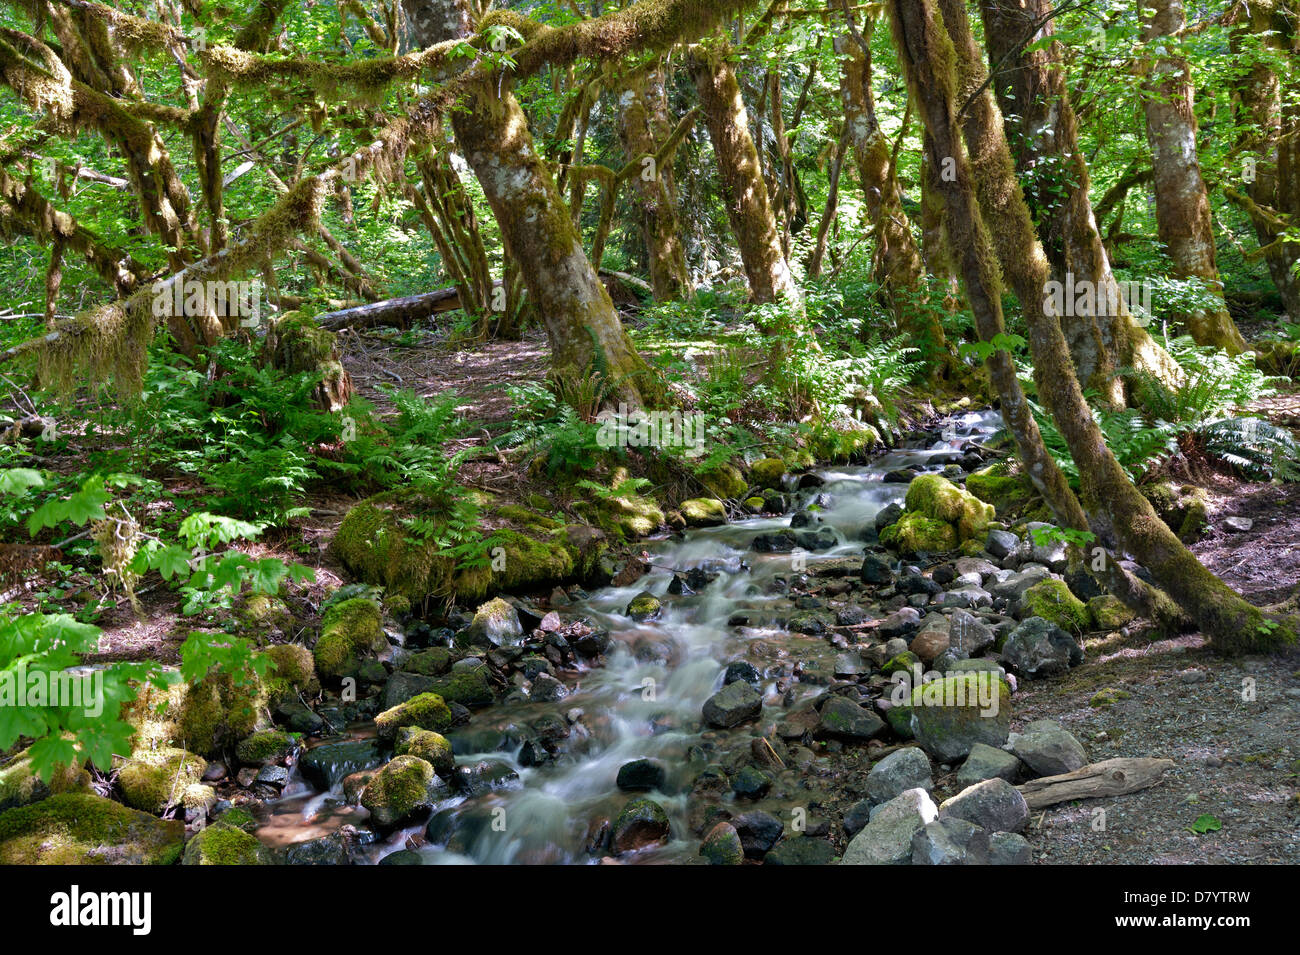 Primeval rain forest with mossed ground, stones and a brook Stock Photo